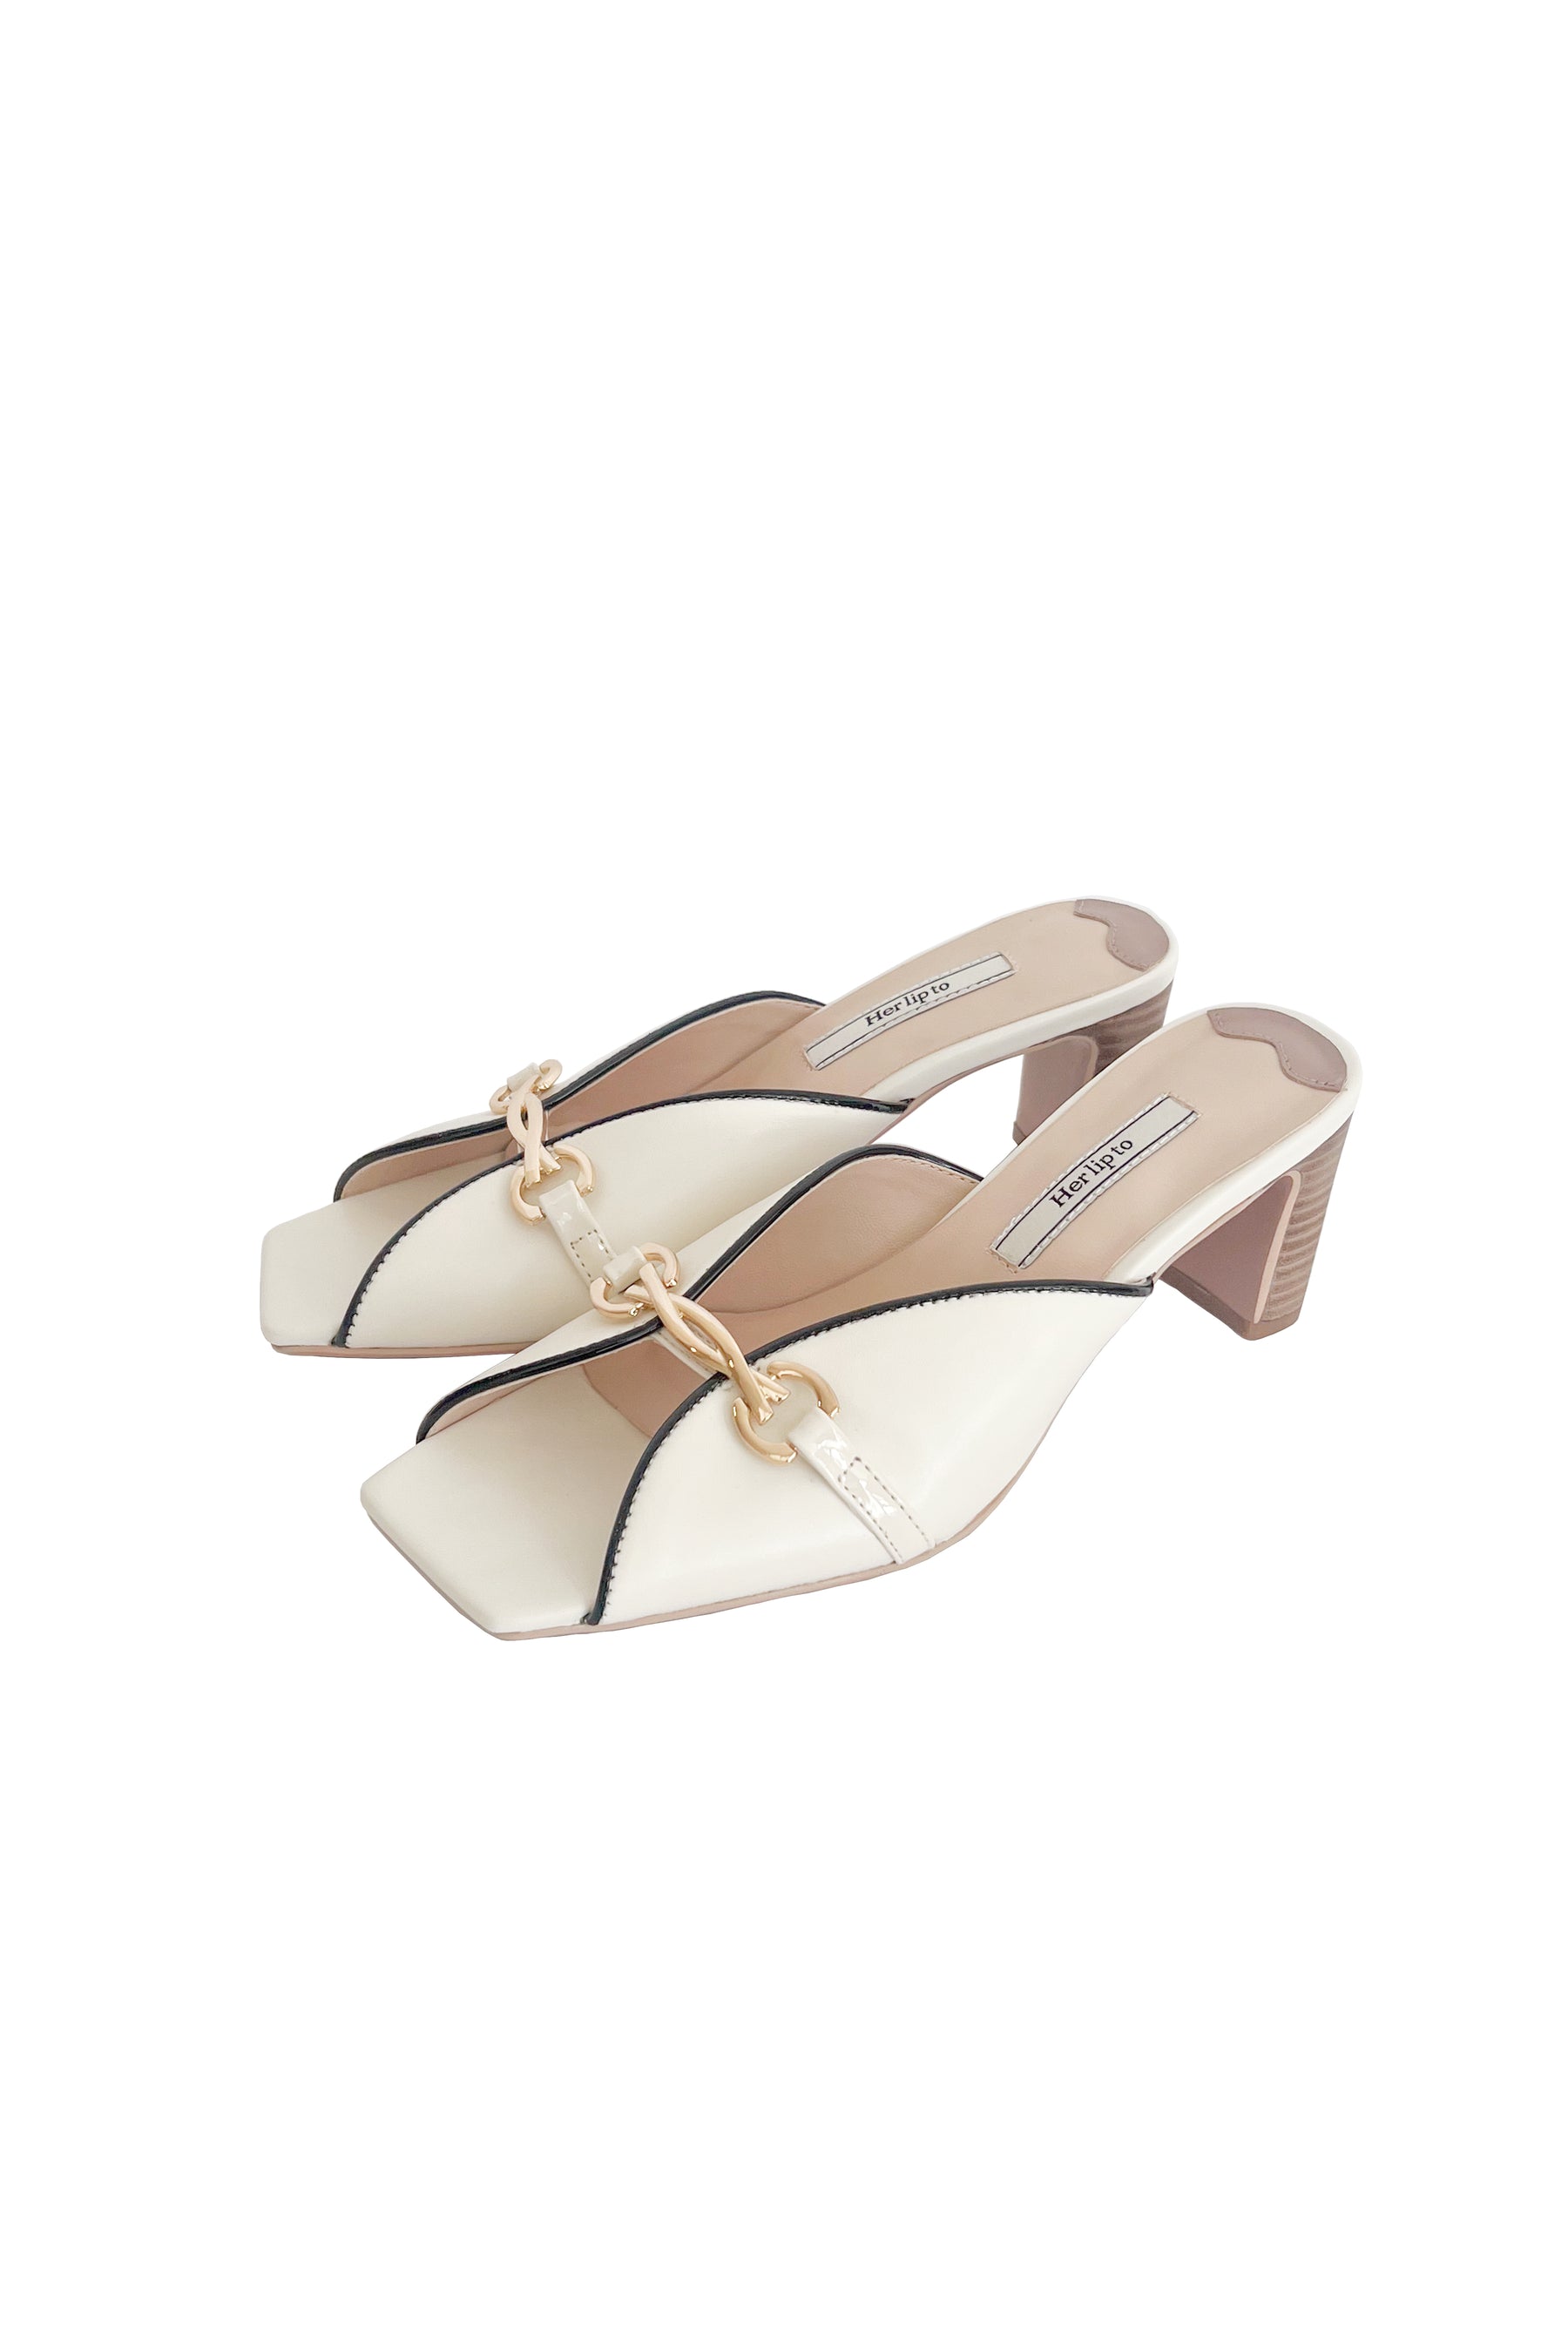 [Shipping in early June] Bit Square-Toe Mules